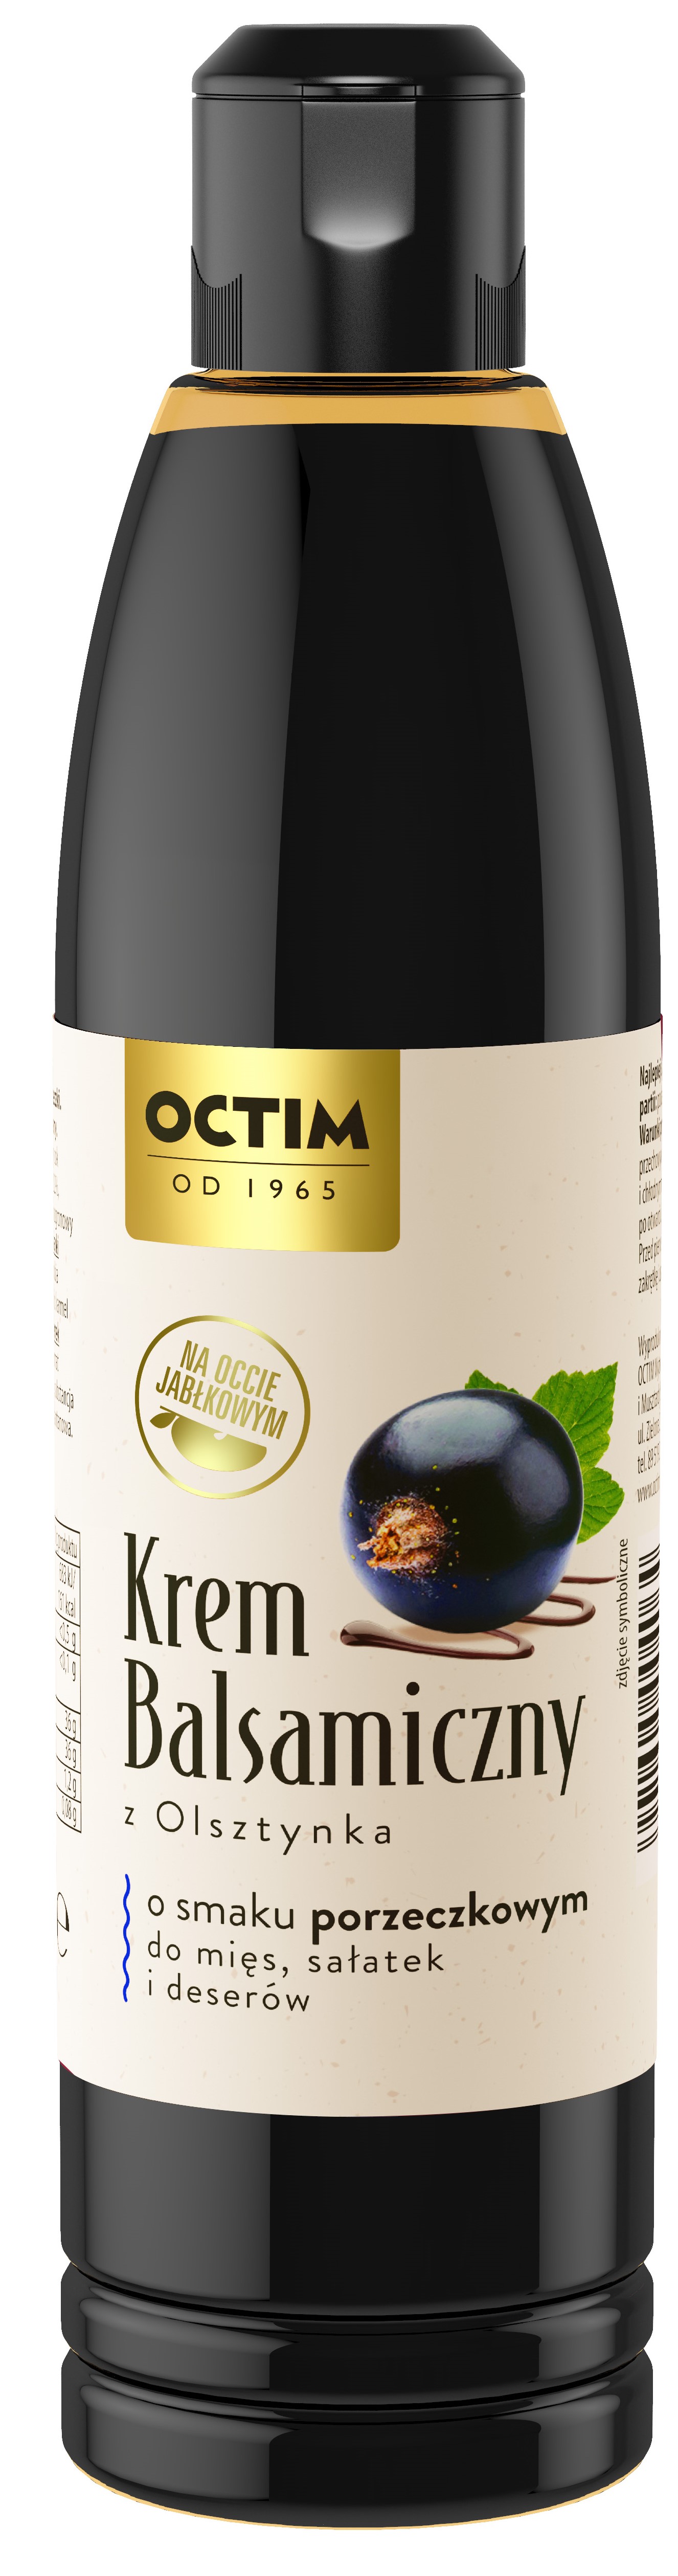 Octim Balsamic cream with currant flavor